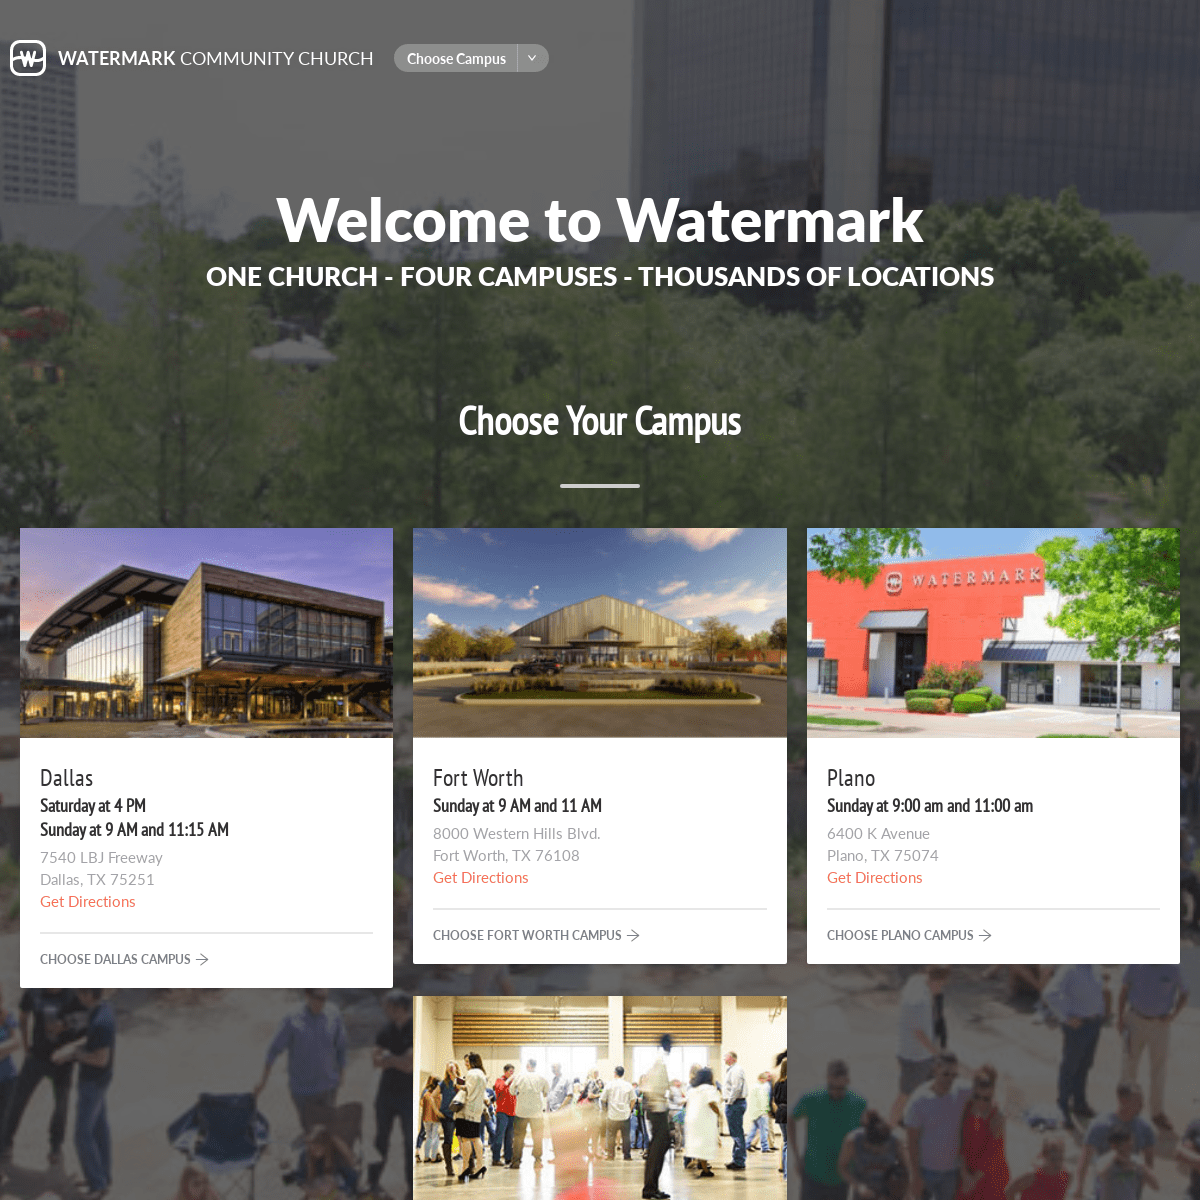 Welcome to Watermark Community Church | One Church - Four Campuses - Thousands of Locations